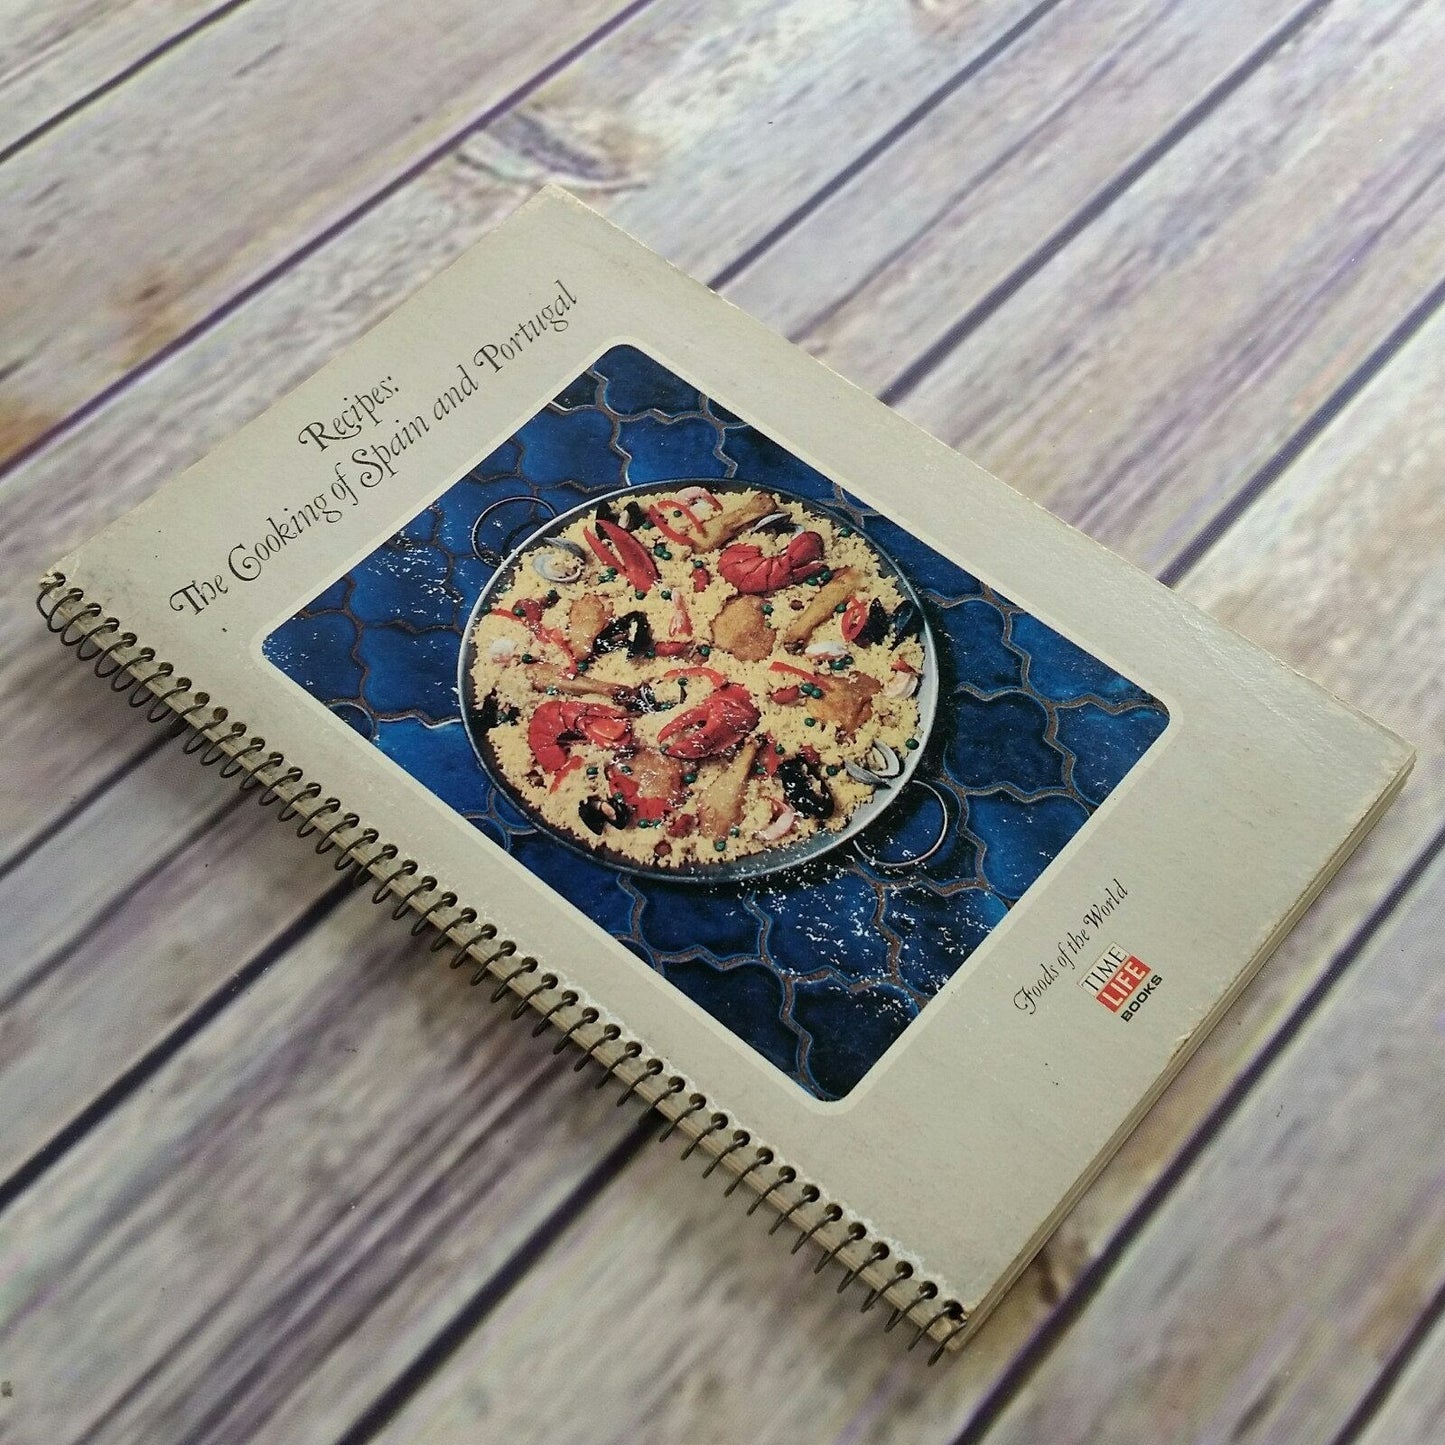 Vtg Spanish and Portuguese Cookbook The Cooking of Spain and Portugal Time Life Books Foods of the World 1969 Spiral Bound